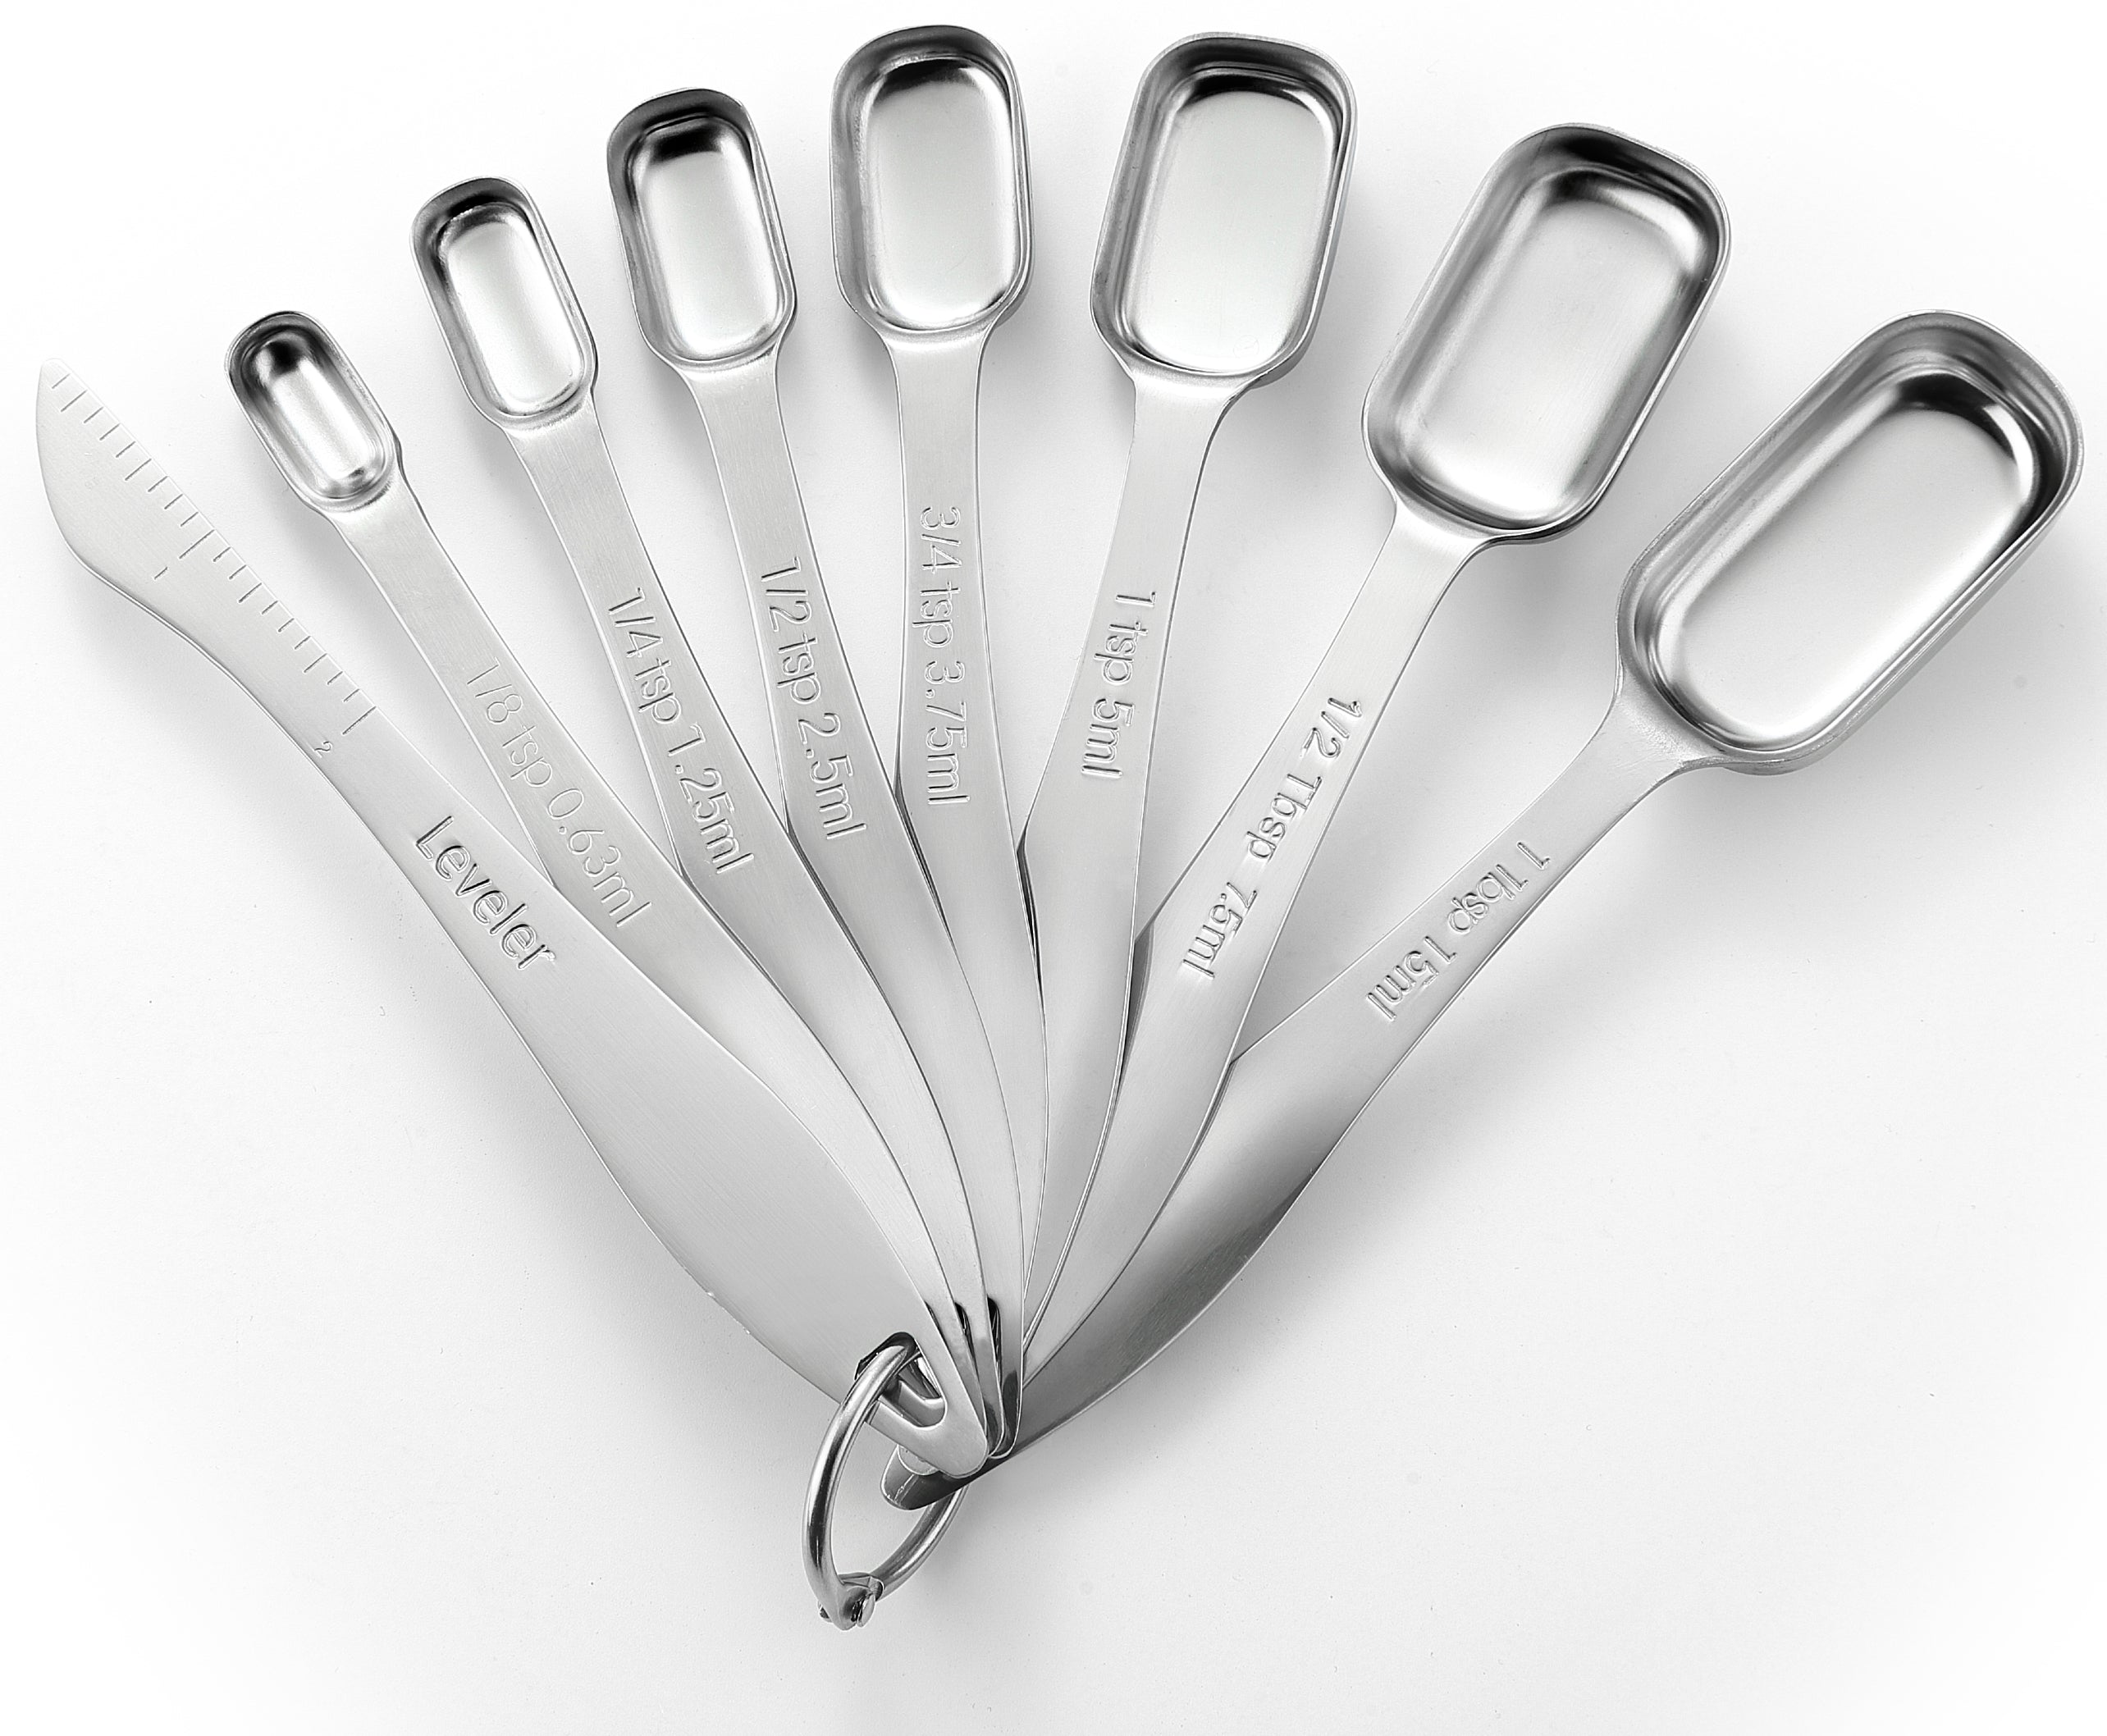 Spring Chef Stainless Steel Rectangular Measuring Spoons, Set of 7 &  Stainless Steel Kitchen Scissors with Blade Cover, Black - 2 Product Bundle  - Yahoo Shopping